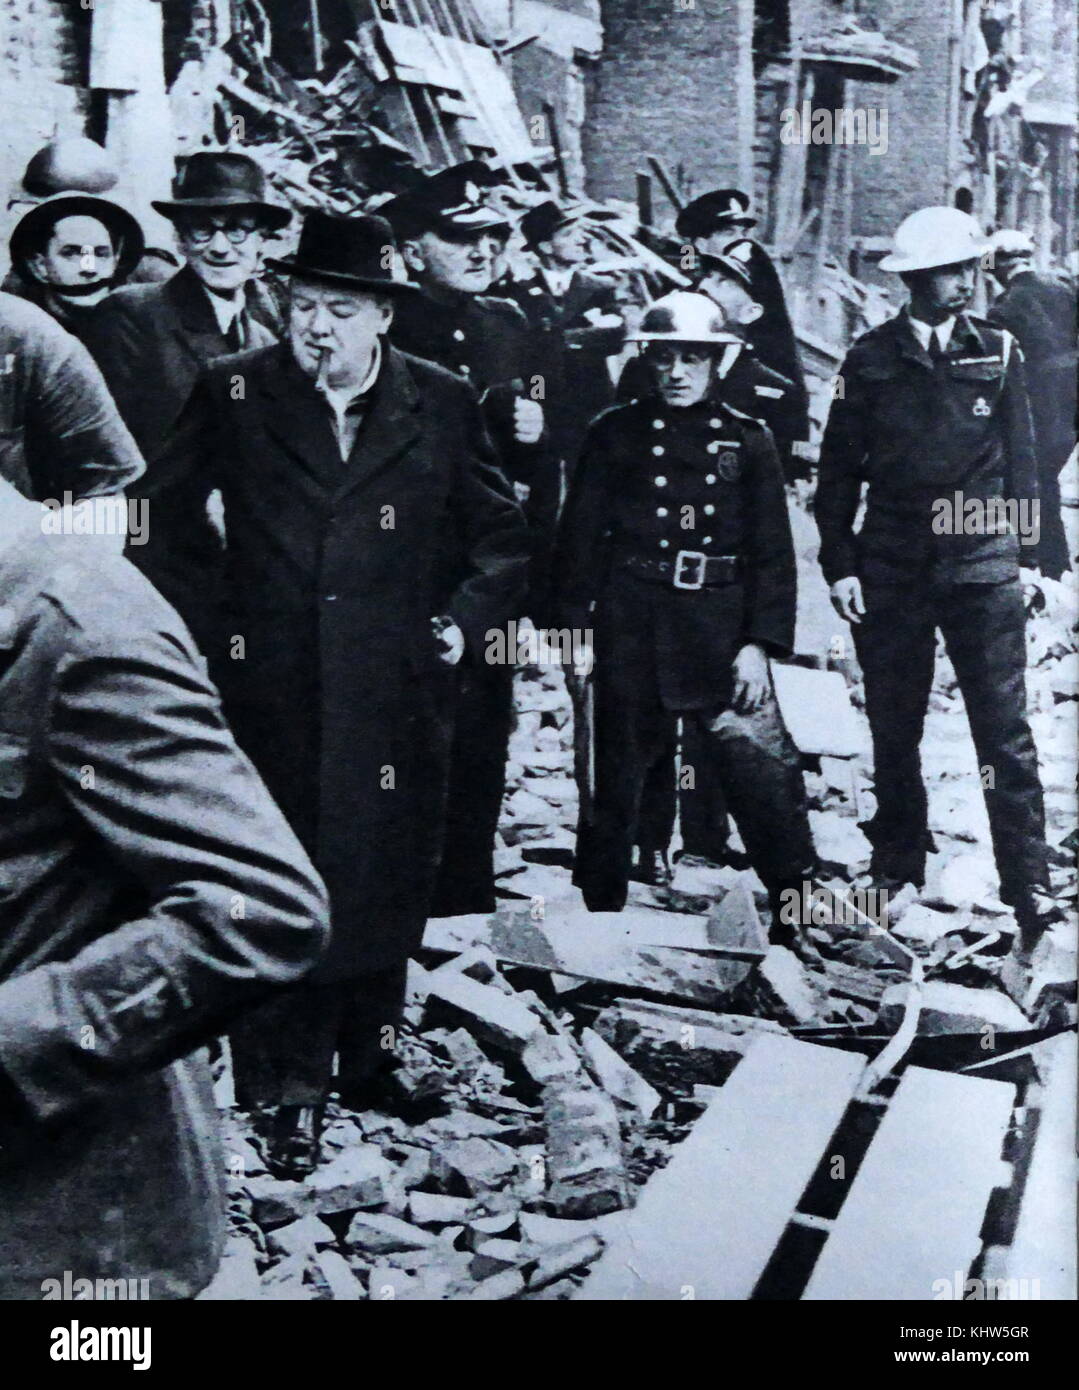 Photograph of Sir Winston Churchill walking amongst the rubble of homes as a result of an air raid on London. Sir Winston Leonard Spencer-Churchill (1874-1965) a British politician and Prime Minister of the United Kingdom. Dated 20th Century Stock Photo